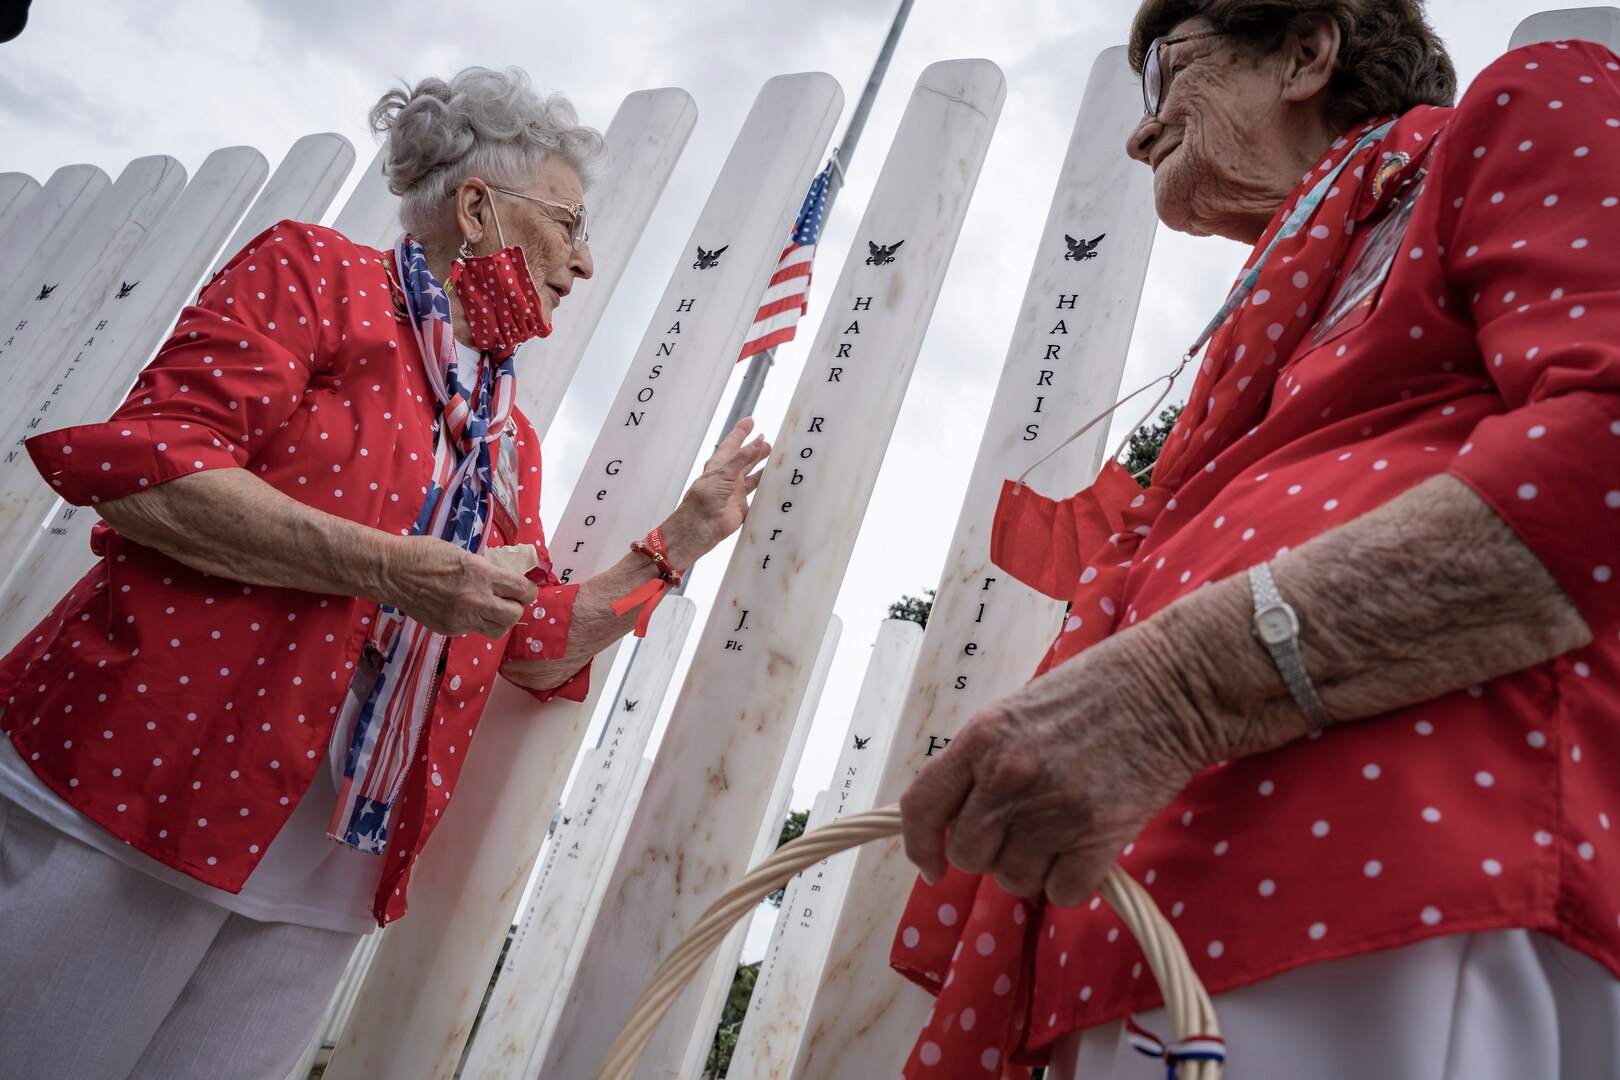 PEARL HARBOR, Hawaii (Dec. 7, 2021) - "Rosie" Mae Krier (left) and "Rosie" Marian Wynn place rose petals at the memorial marker of a close friend at the USS Oklahoma (BB-37) Memorial Ceremony. Wynn was a shipyard worker while Krier built B-17 and B-29 aircraft bombers during WWII. (U.S. Navy Photo by MC1 Jeffrey Hanshaw/Released).